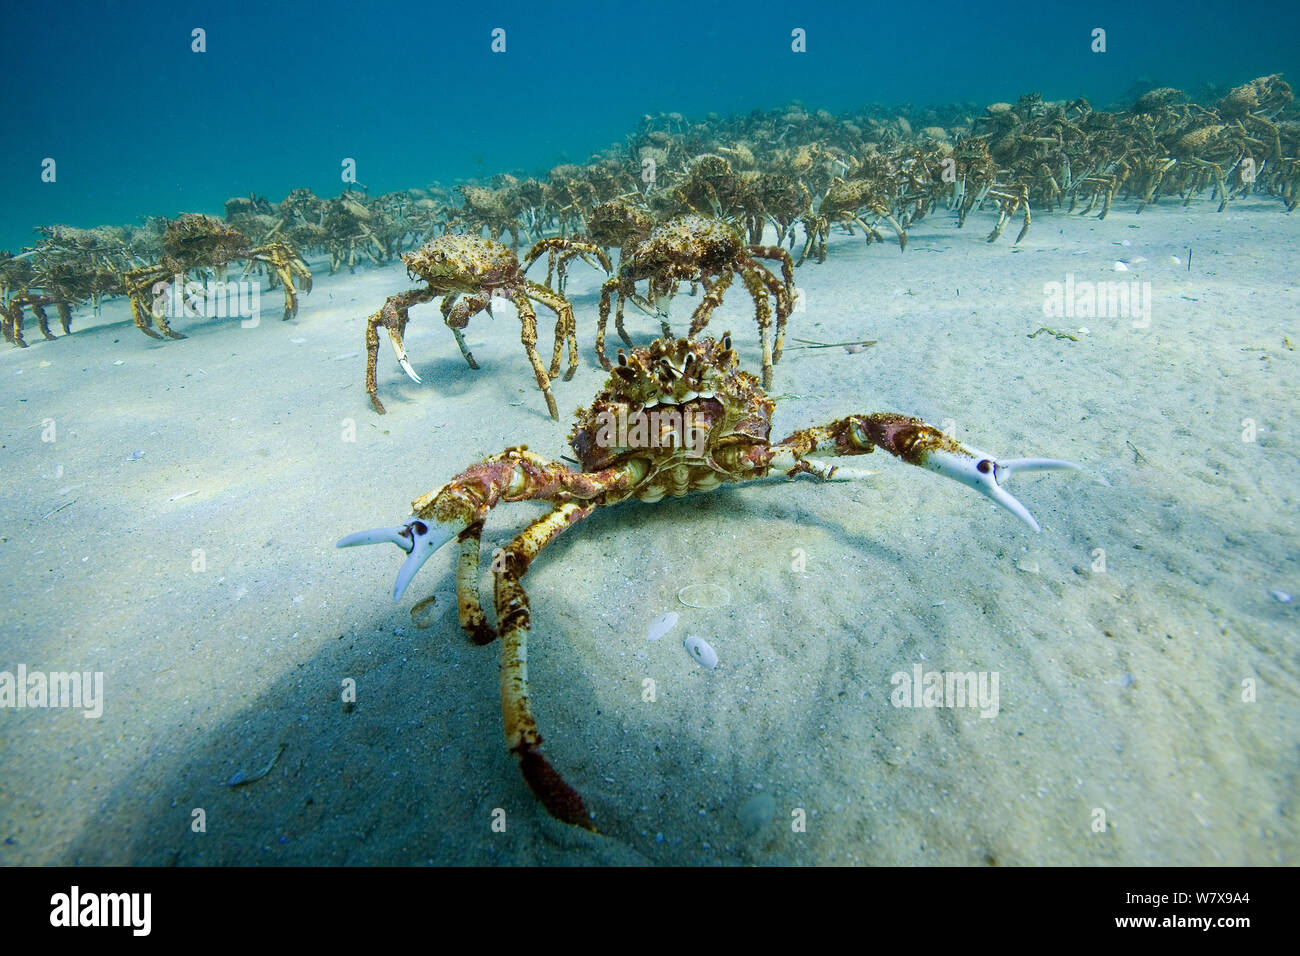 Aggregation of thousands of Spider crabs (Leptomithrax gaimardii) for moulting, South Australia Basin, Australia. Pacific Ocean. Stock Photo